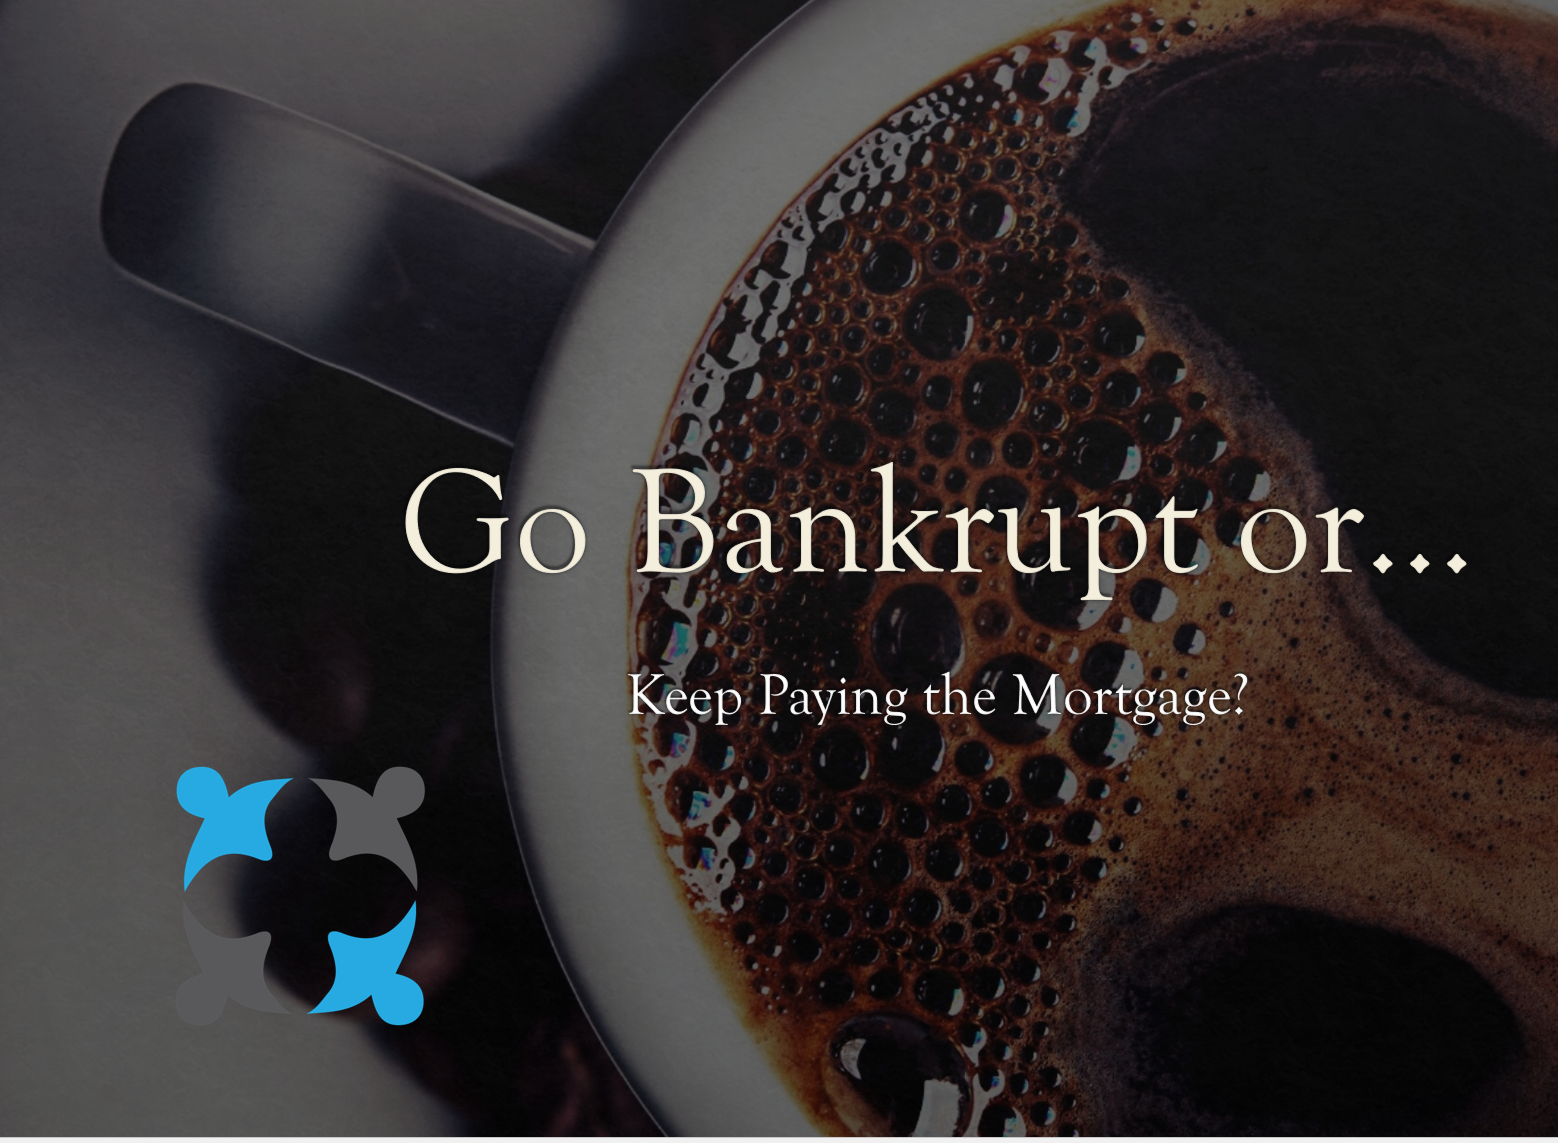 Go Bankrupt, or keep paying the Mortgage?